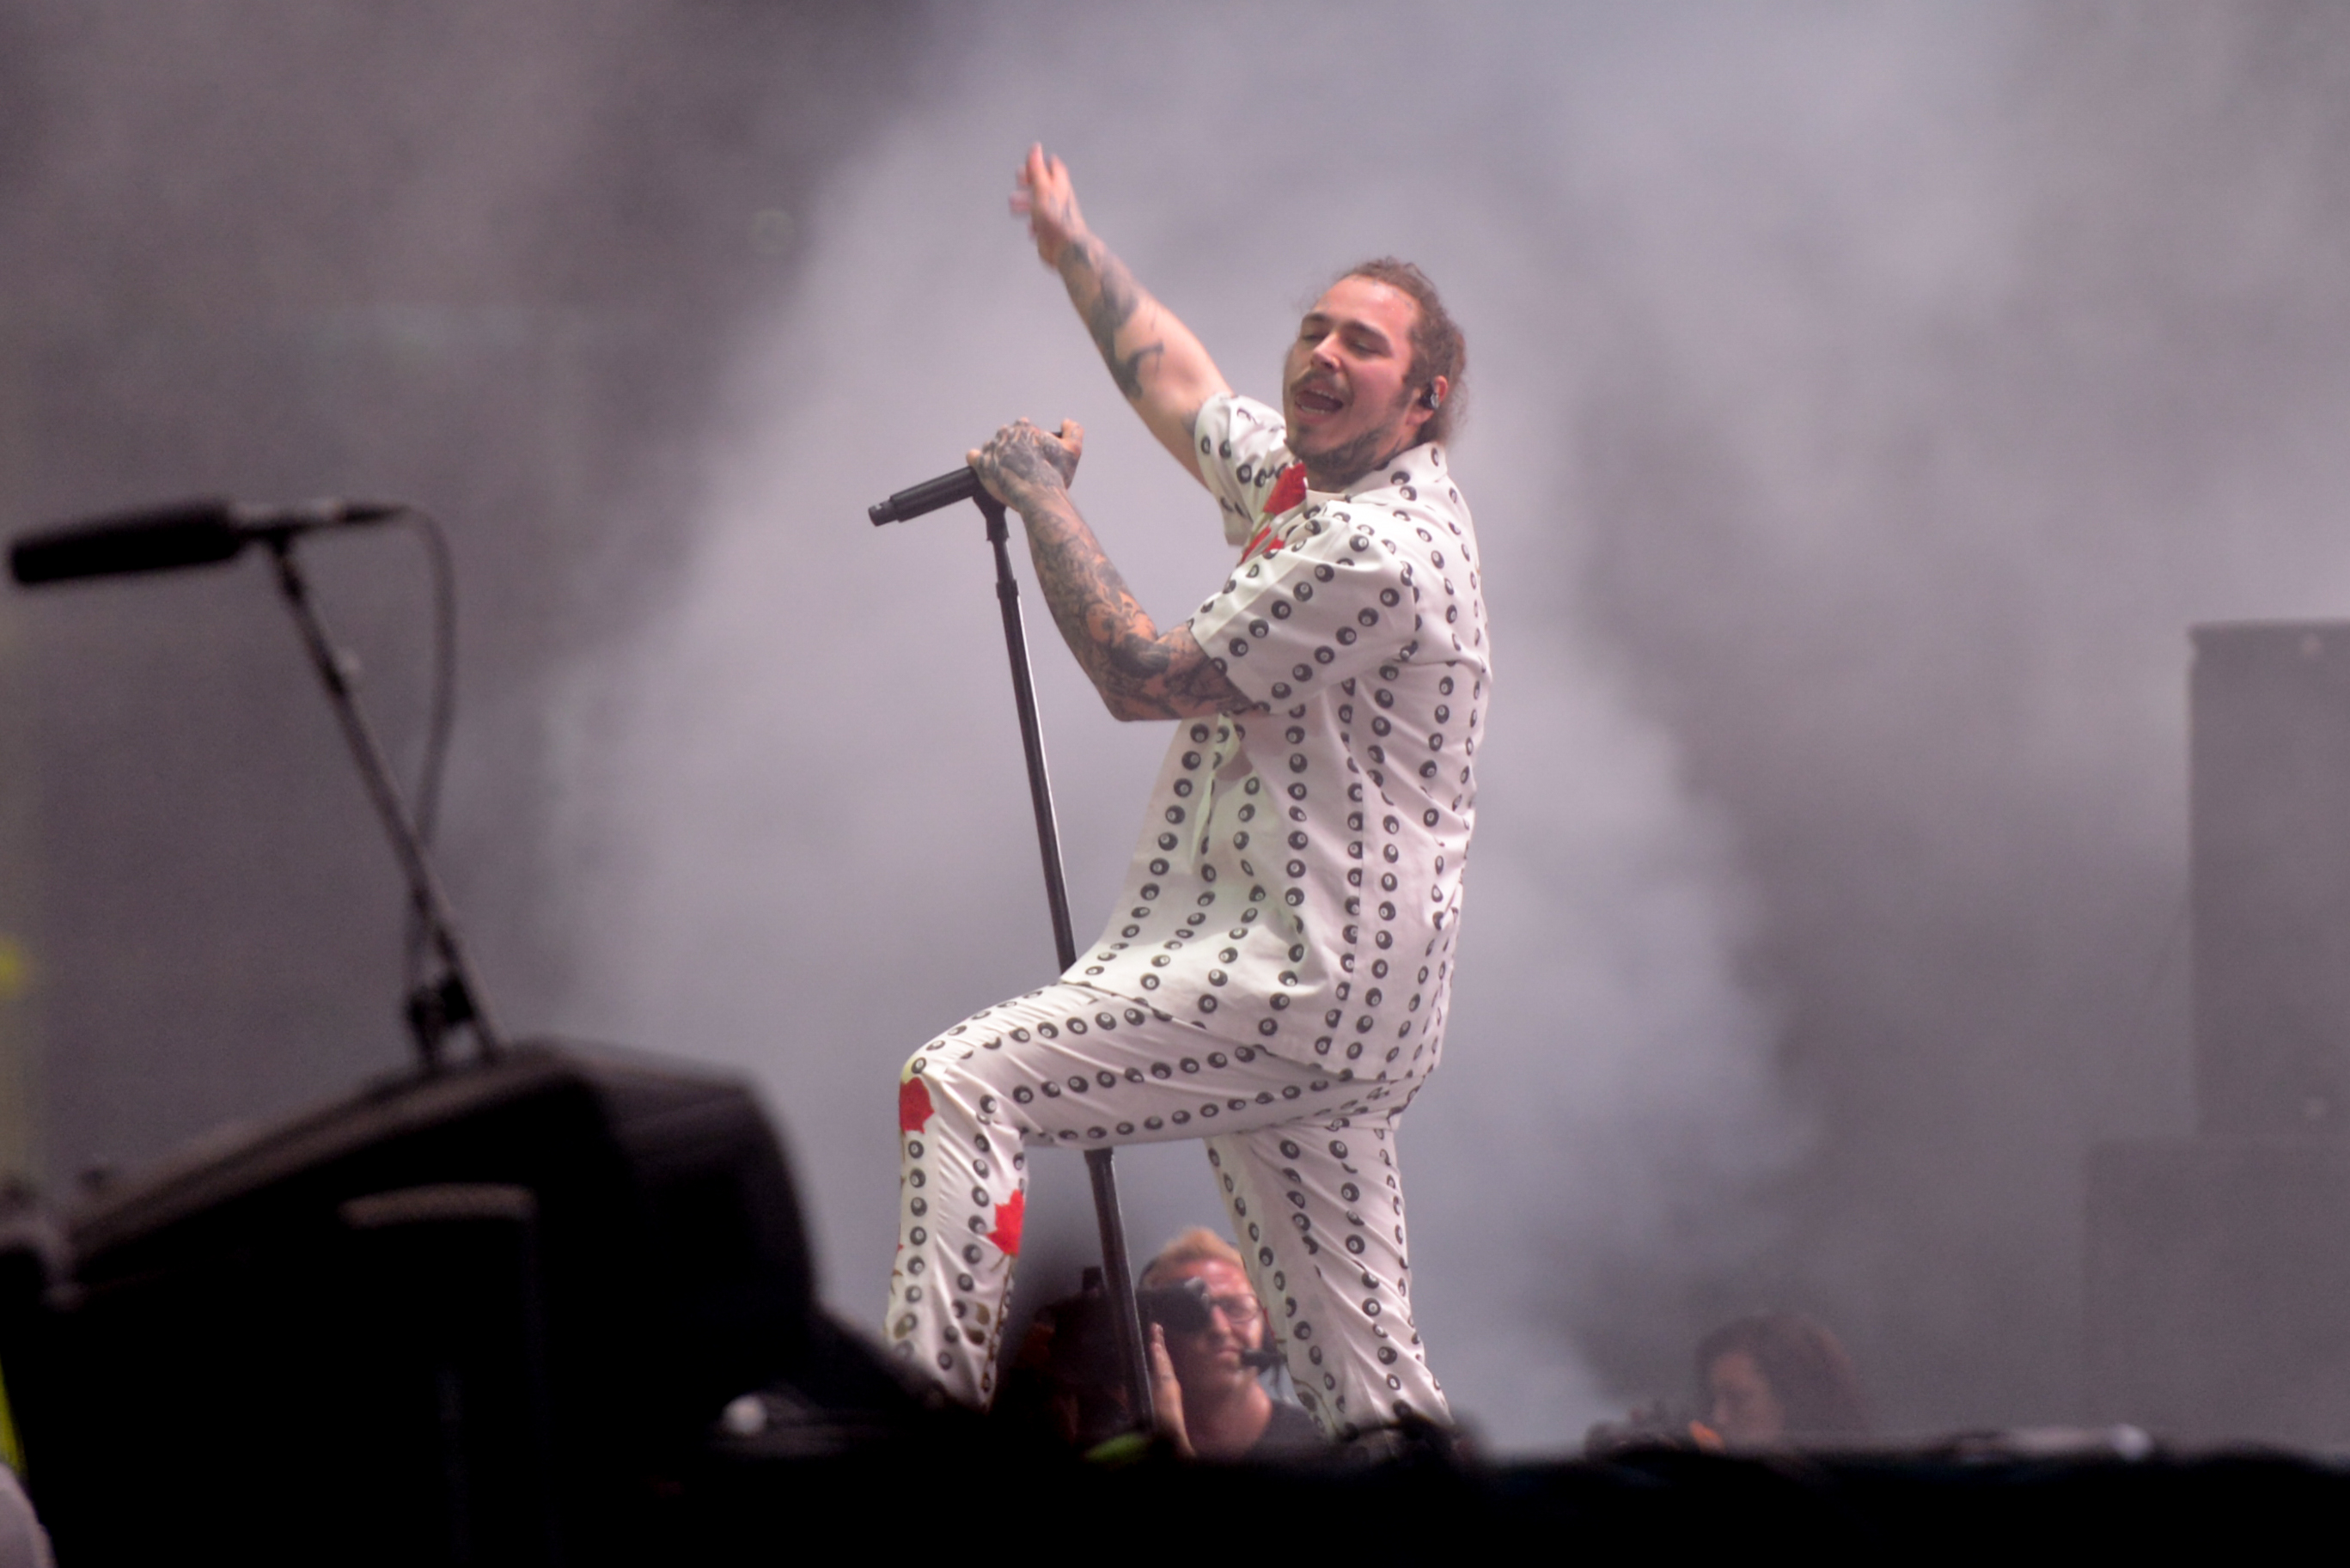 Post Malone Performing Live At The 2018 Coachella Music Festival.